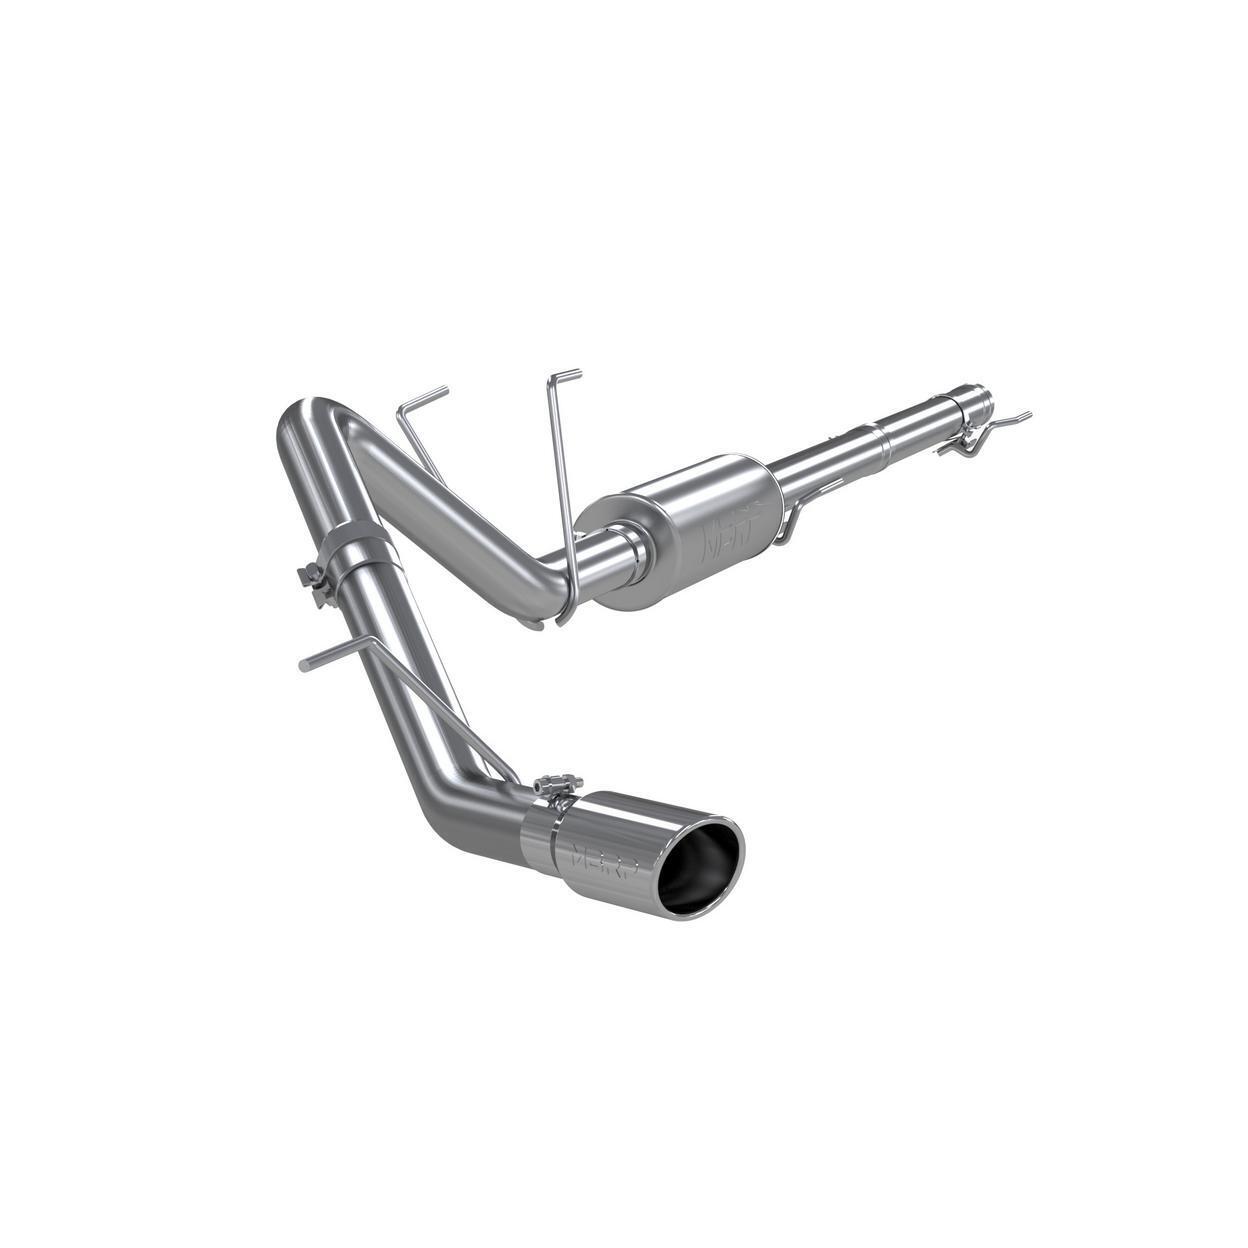 MBRP Exhaust S5142409-VT Exhaust System Kit for 2018 Ram 1500